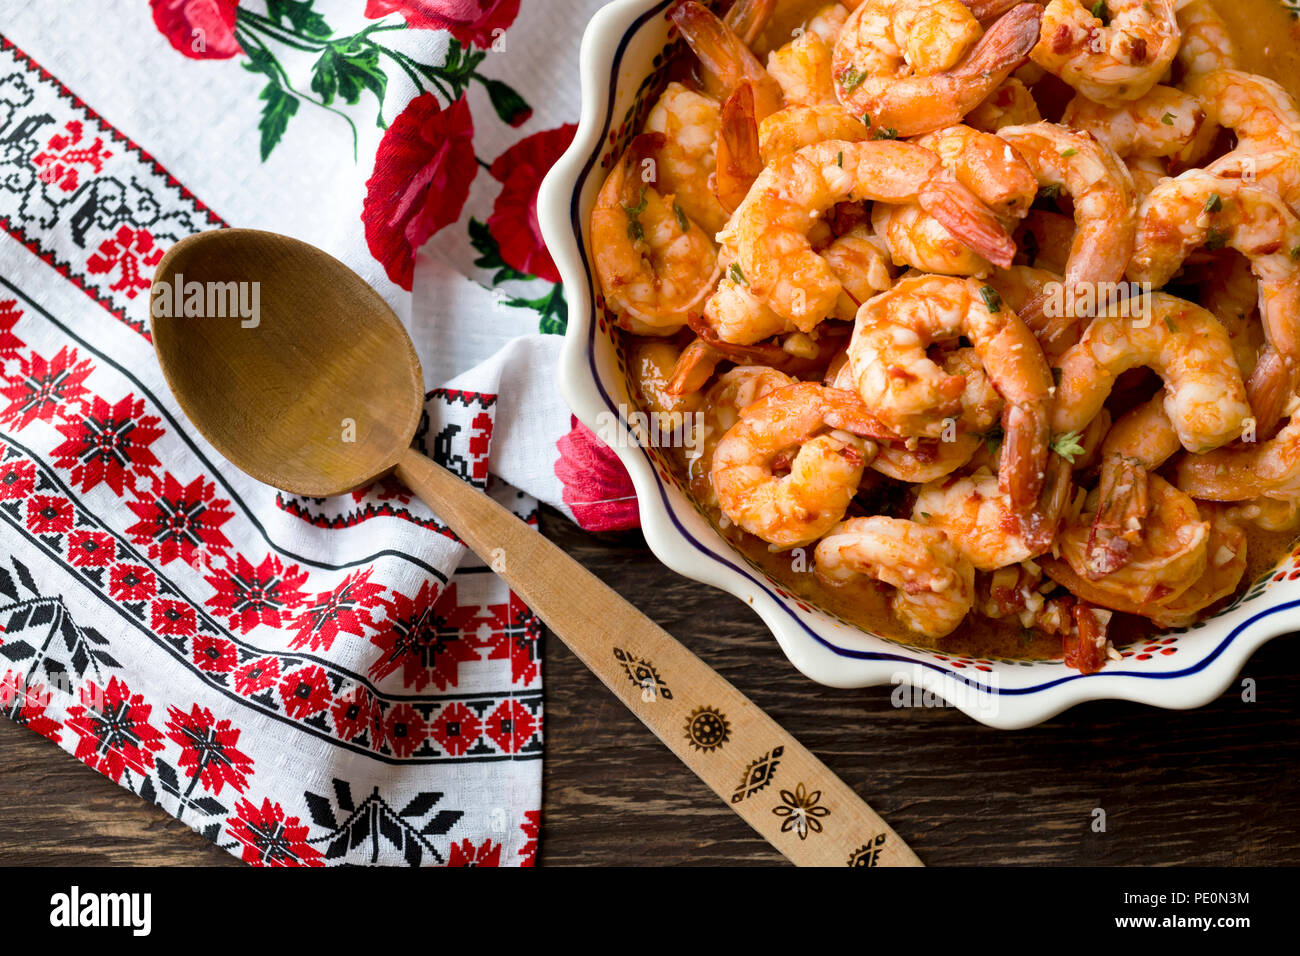 Juicy appetizing Shrimps cooked and baked in sauce are displayed on a wooden table in a dish with ornament located next to a towel with colorful ornam Stock Photo